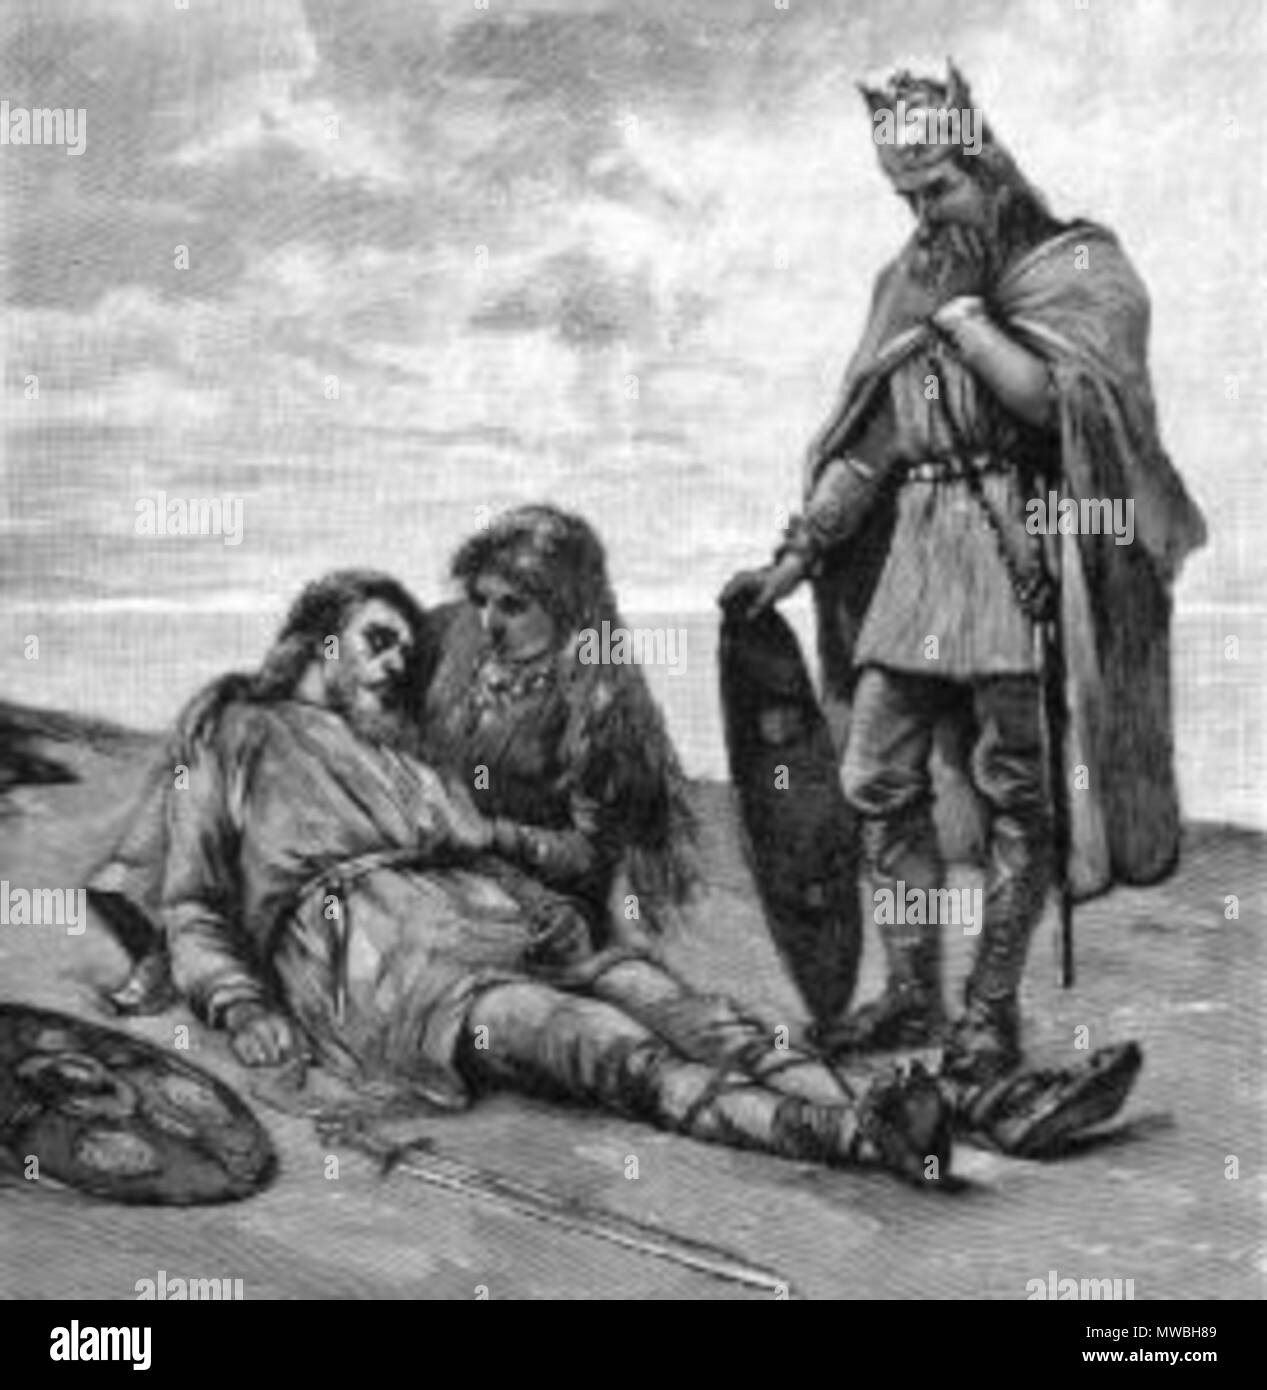 . Helgi, Sváva  and Sigarr . An illustration from Fredrik Sander's 1893 Swedish edition of the Poetic Edda. Reprinted with Erik Brate's 1913 translation which in turn is published by Project Runeberg at http://runeberg.org/eddan/ from where the image is taken   177 Ed0027 Stock Photo